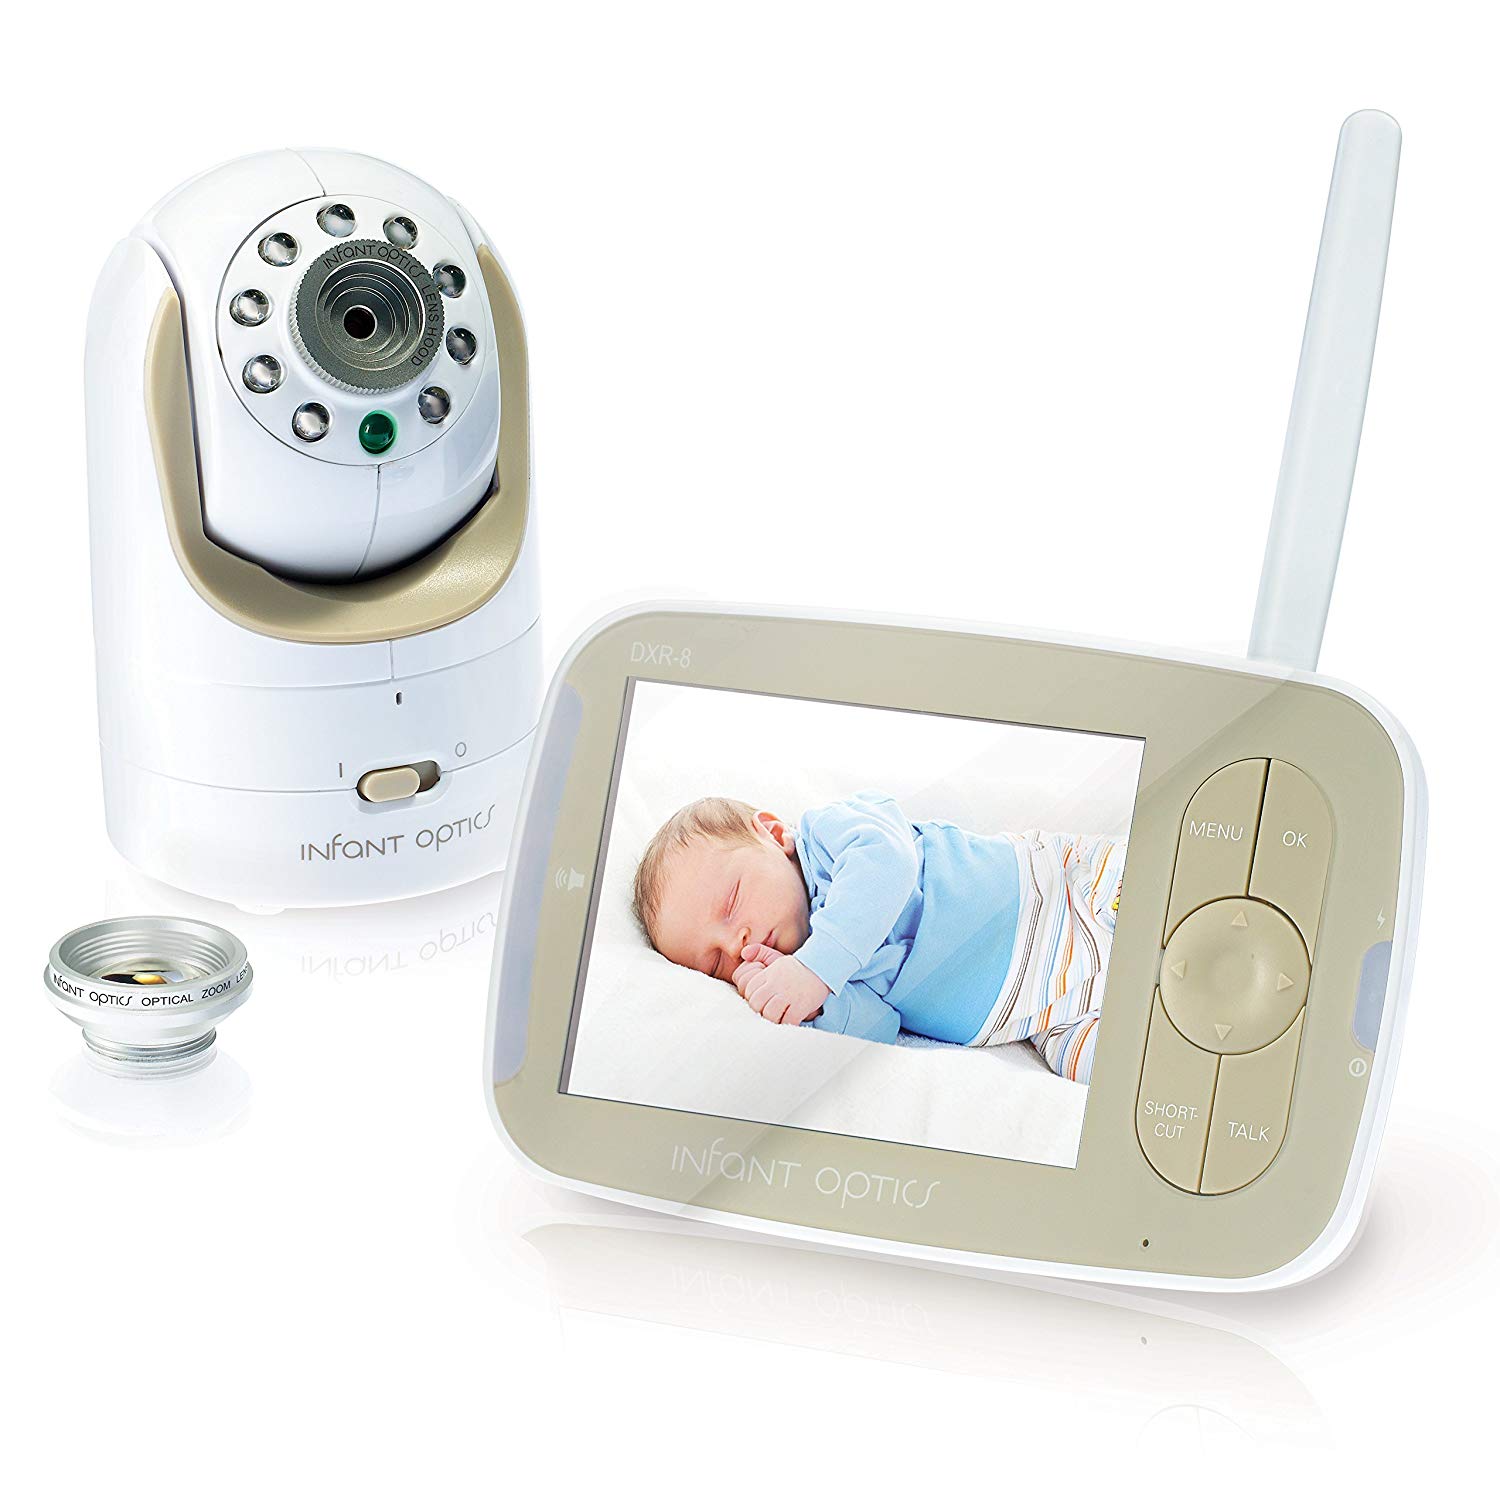 Best Rechargable Video Baby Monitor That You Can Connect to Your Phone